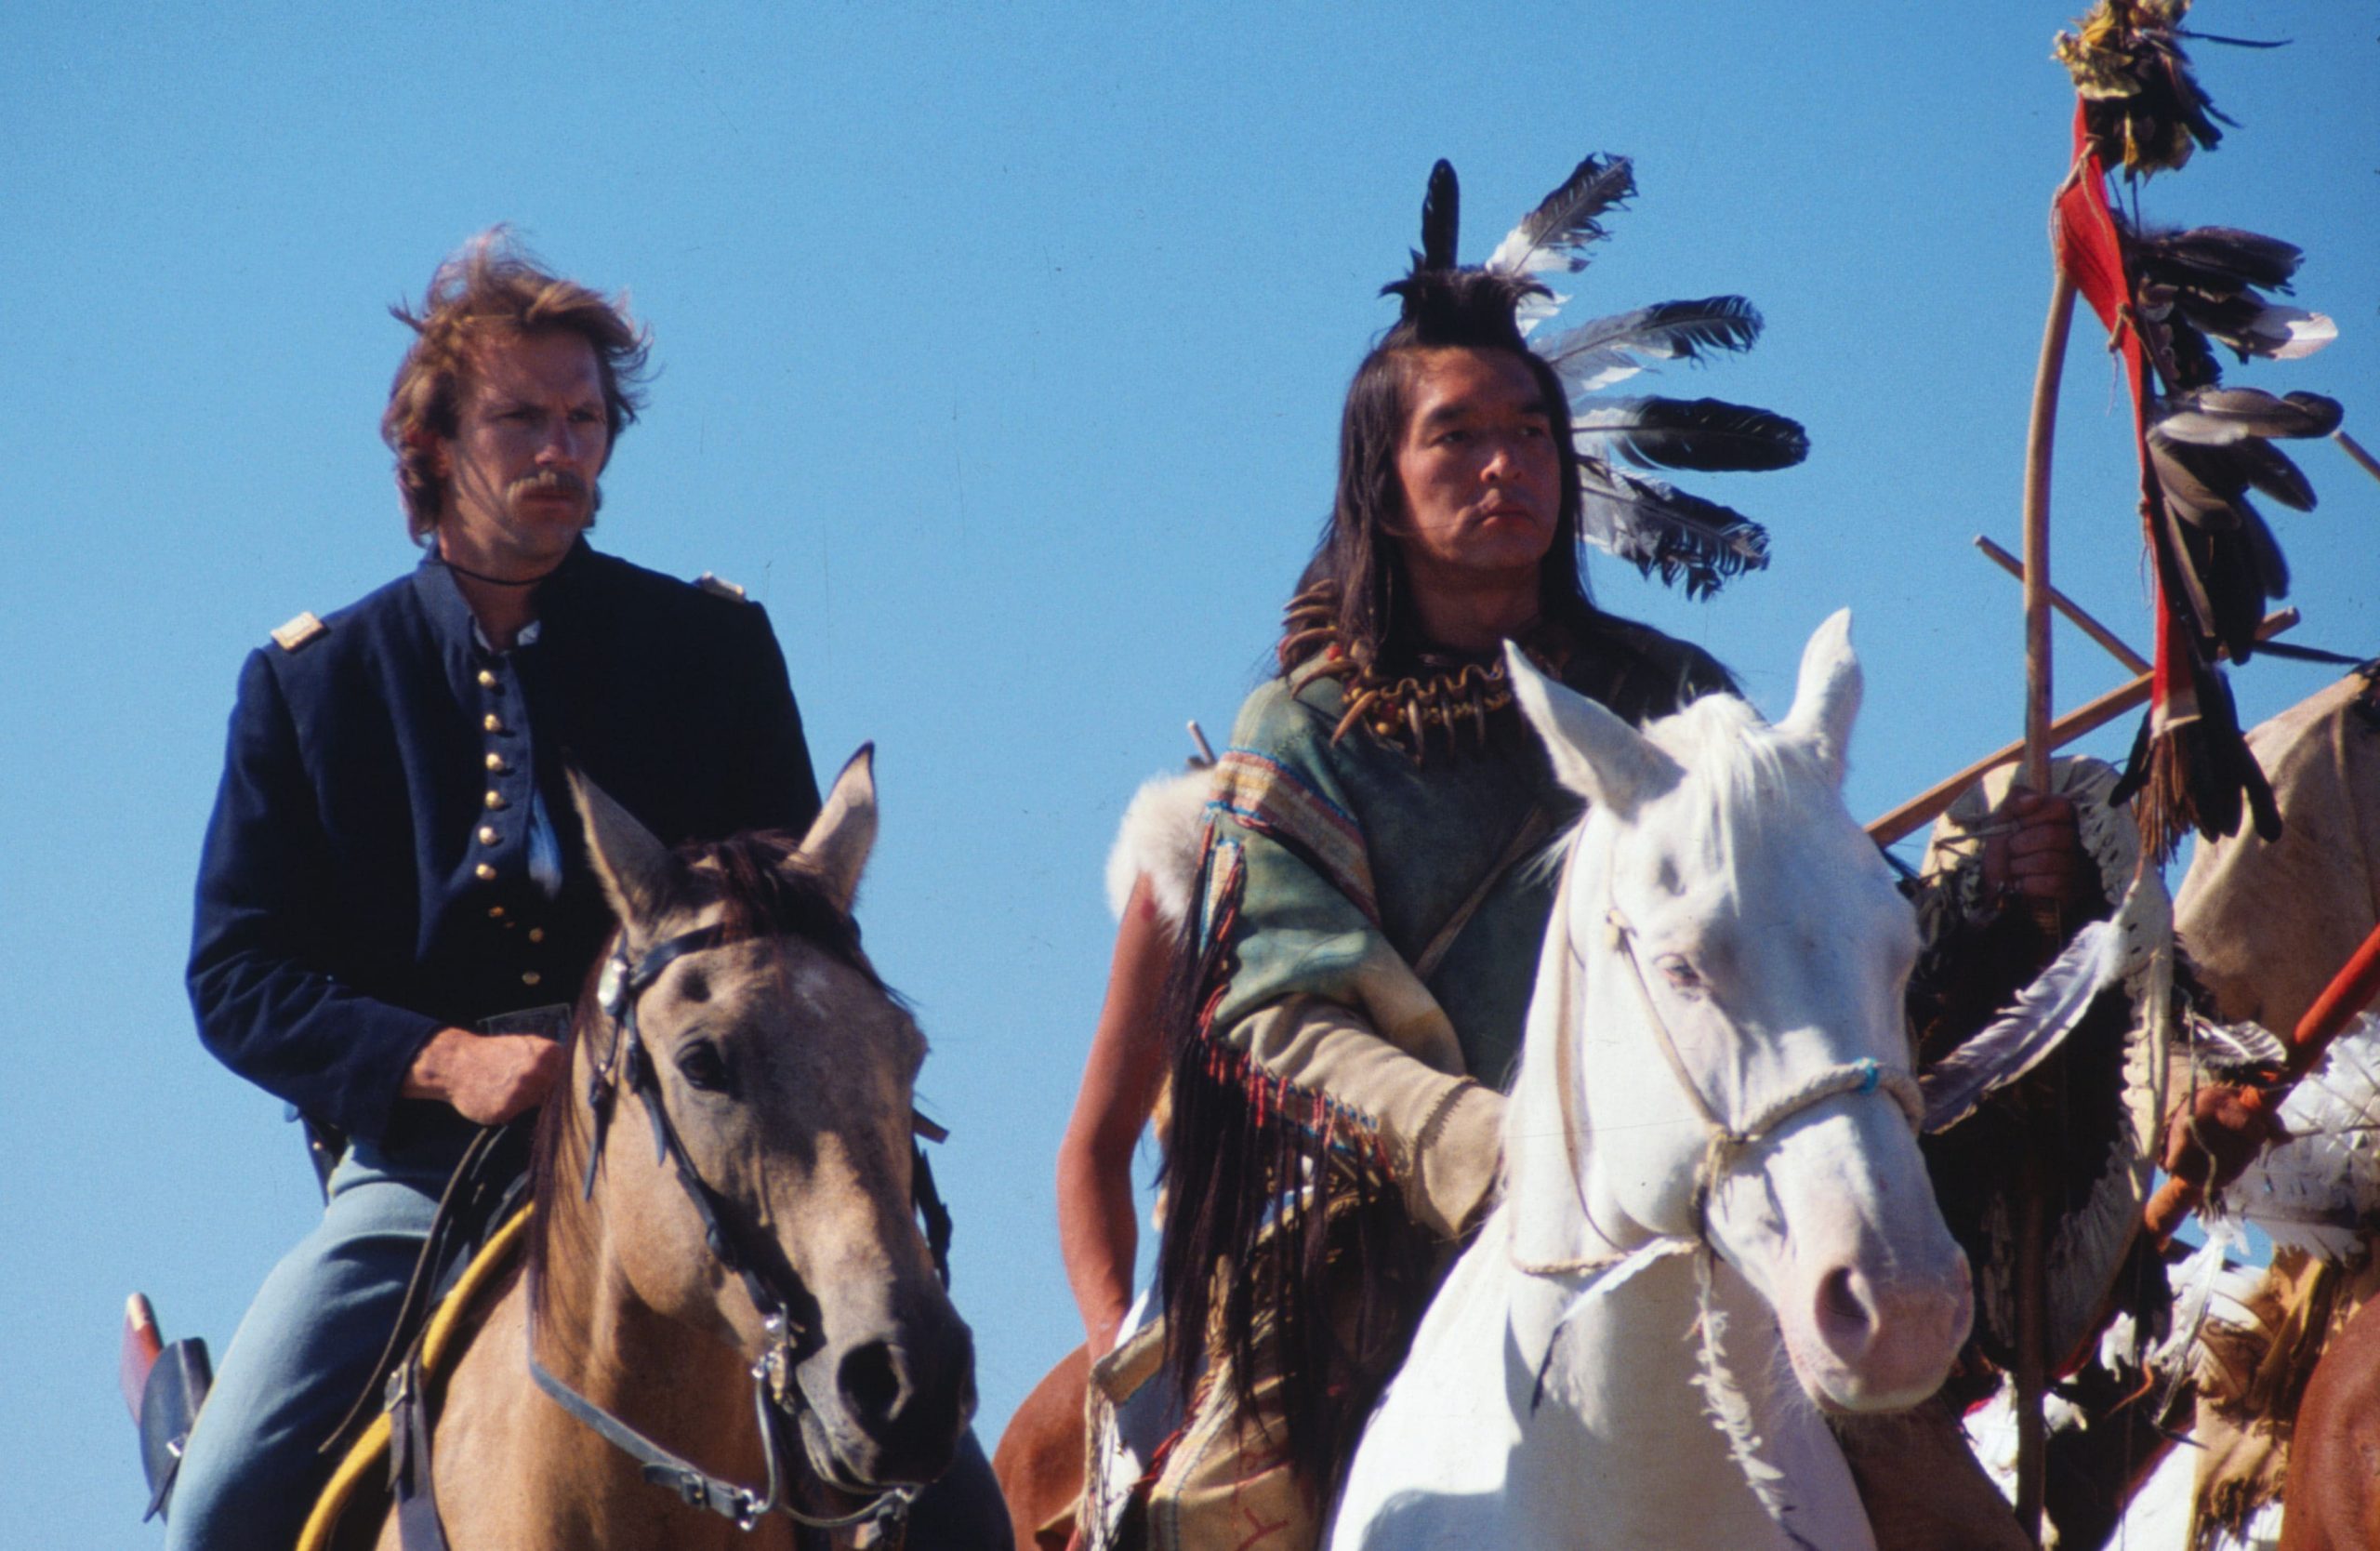 Where was Dances with Wolves filmed?